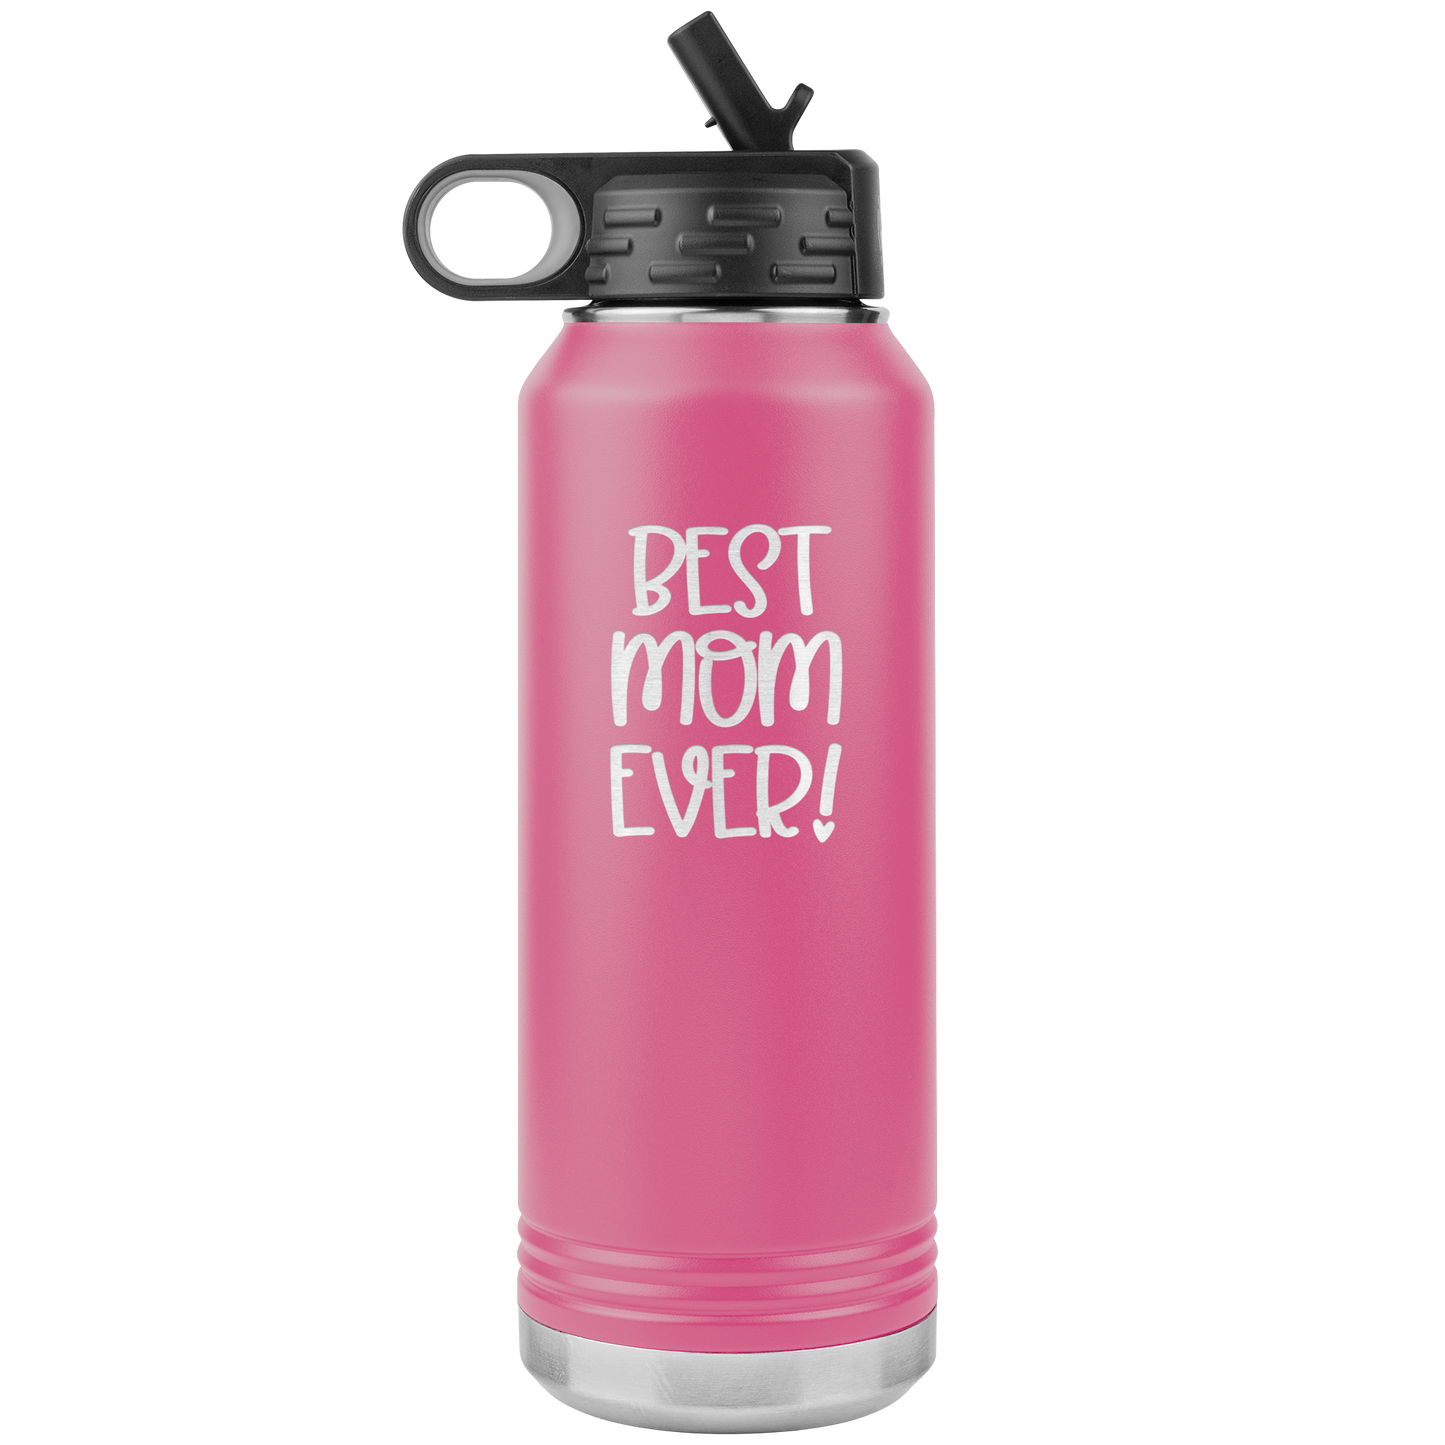 "Best Mom Ever!" 32 oz. Insulated Stainless Steel Water Bottle with Flip Top Lid & Built-in Straw